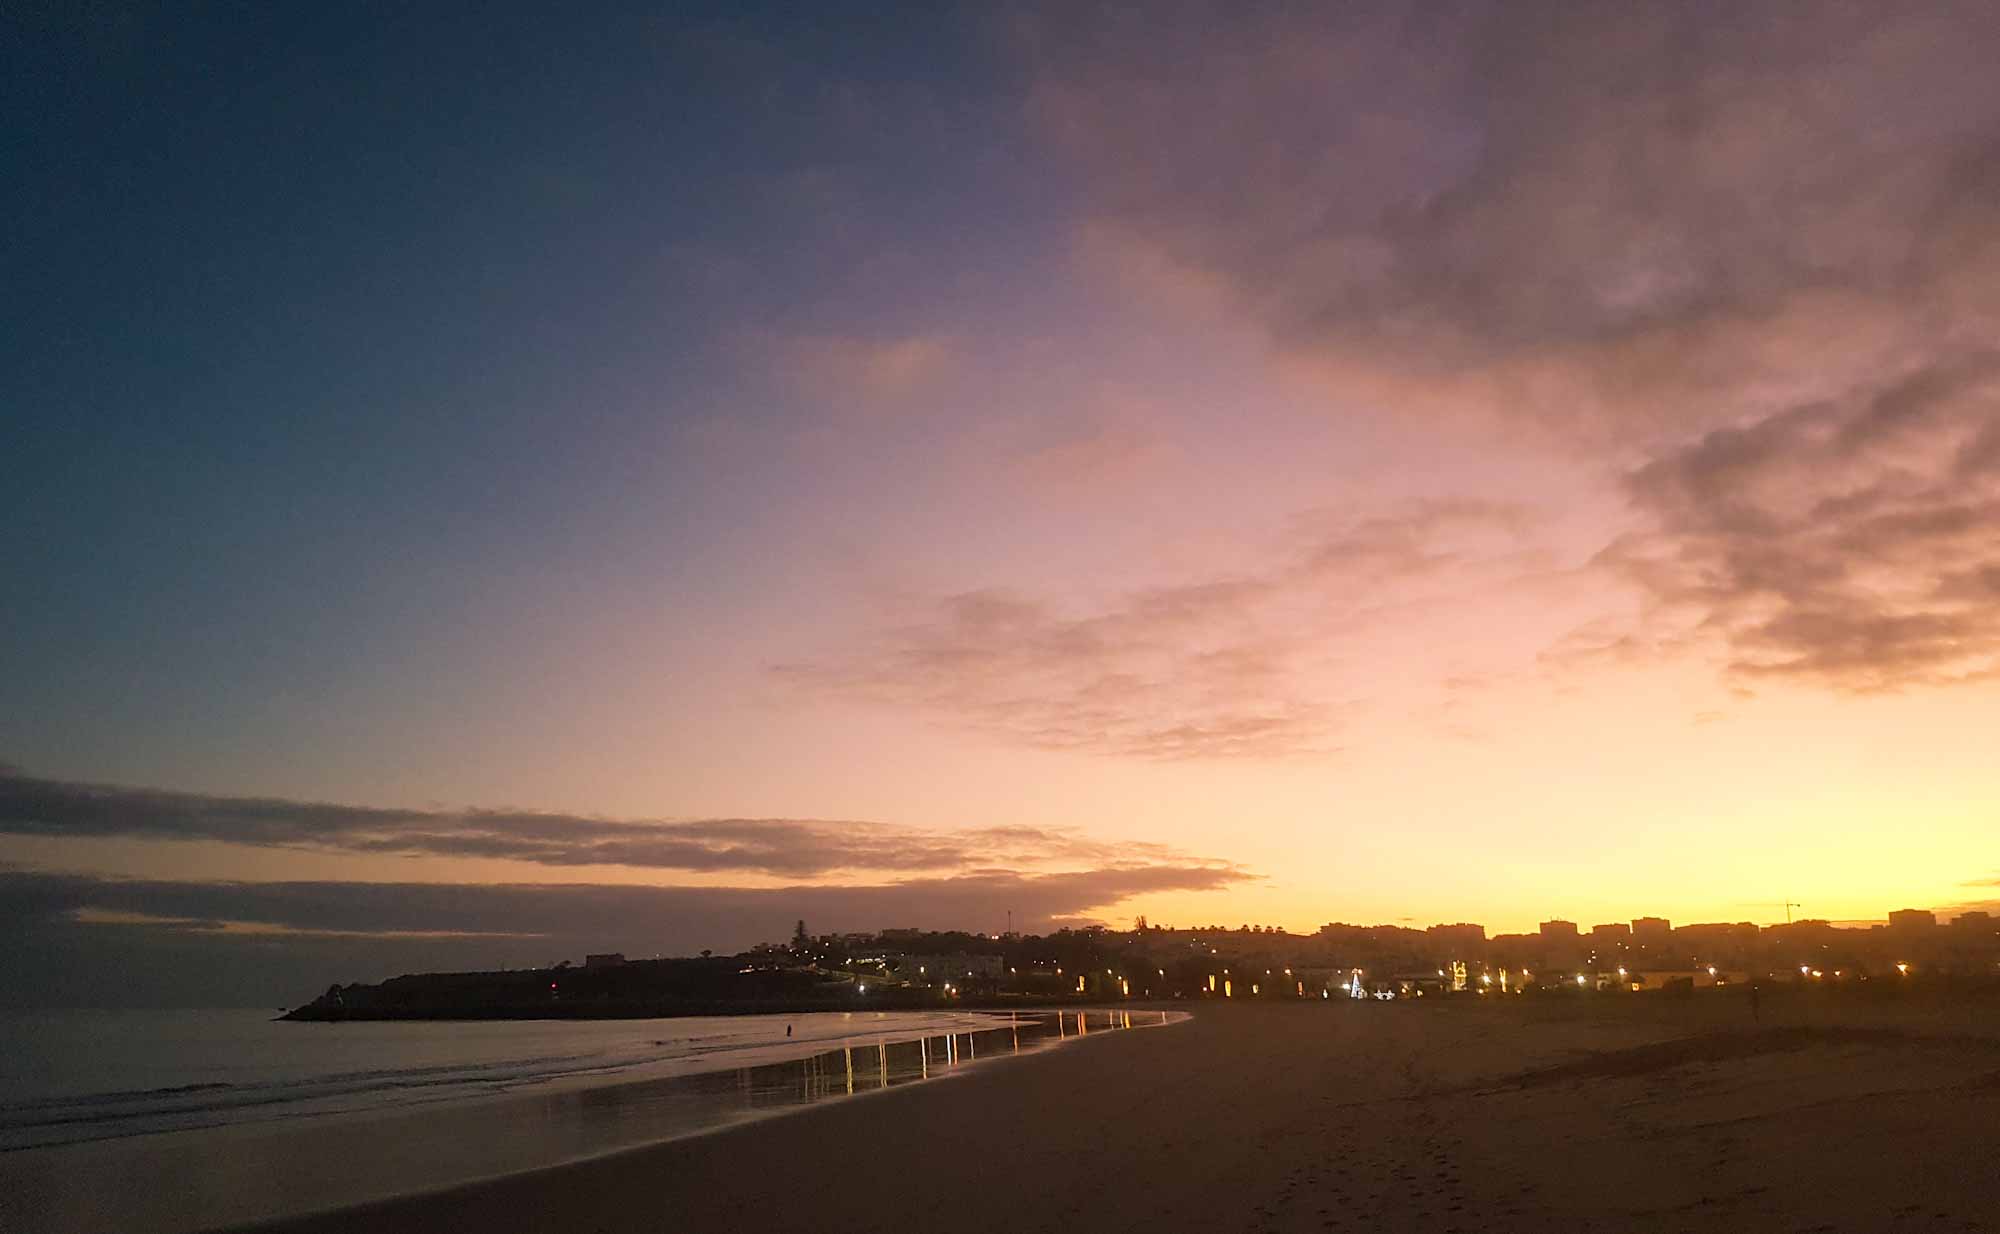 View of a long sandy beach at sunset, with the lights of a town behind